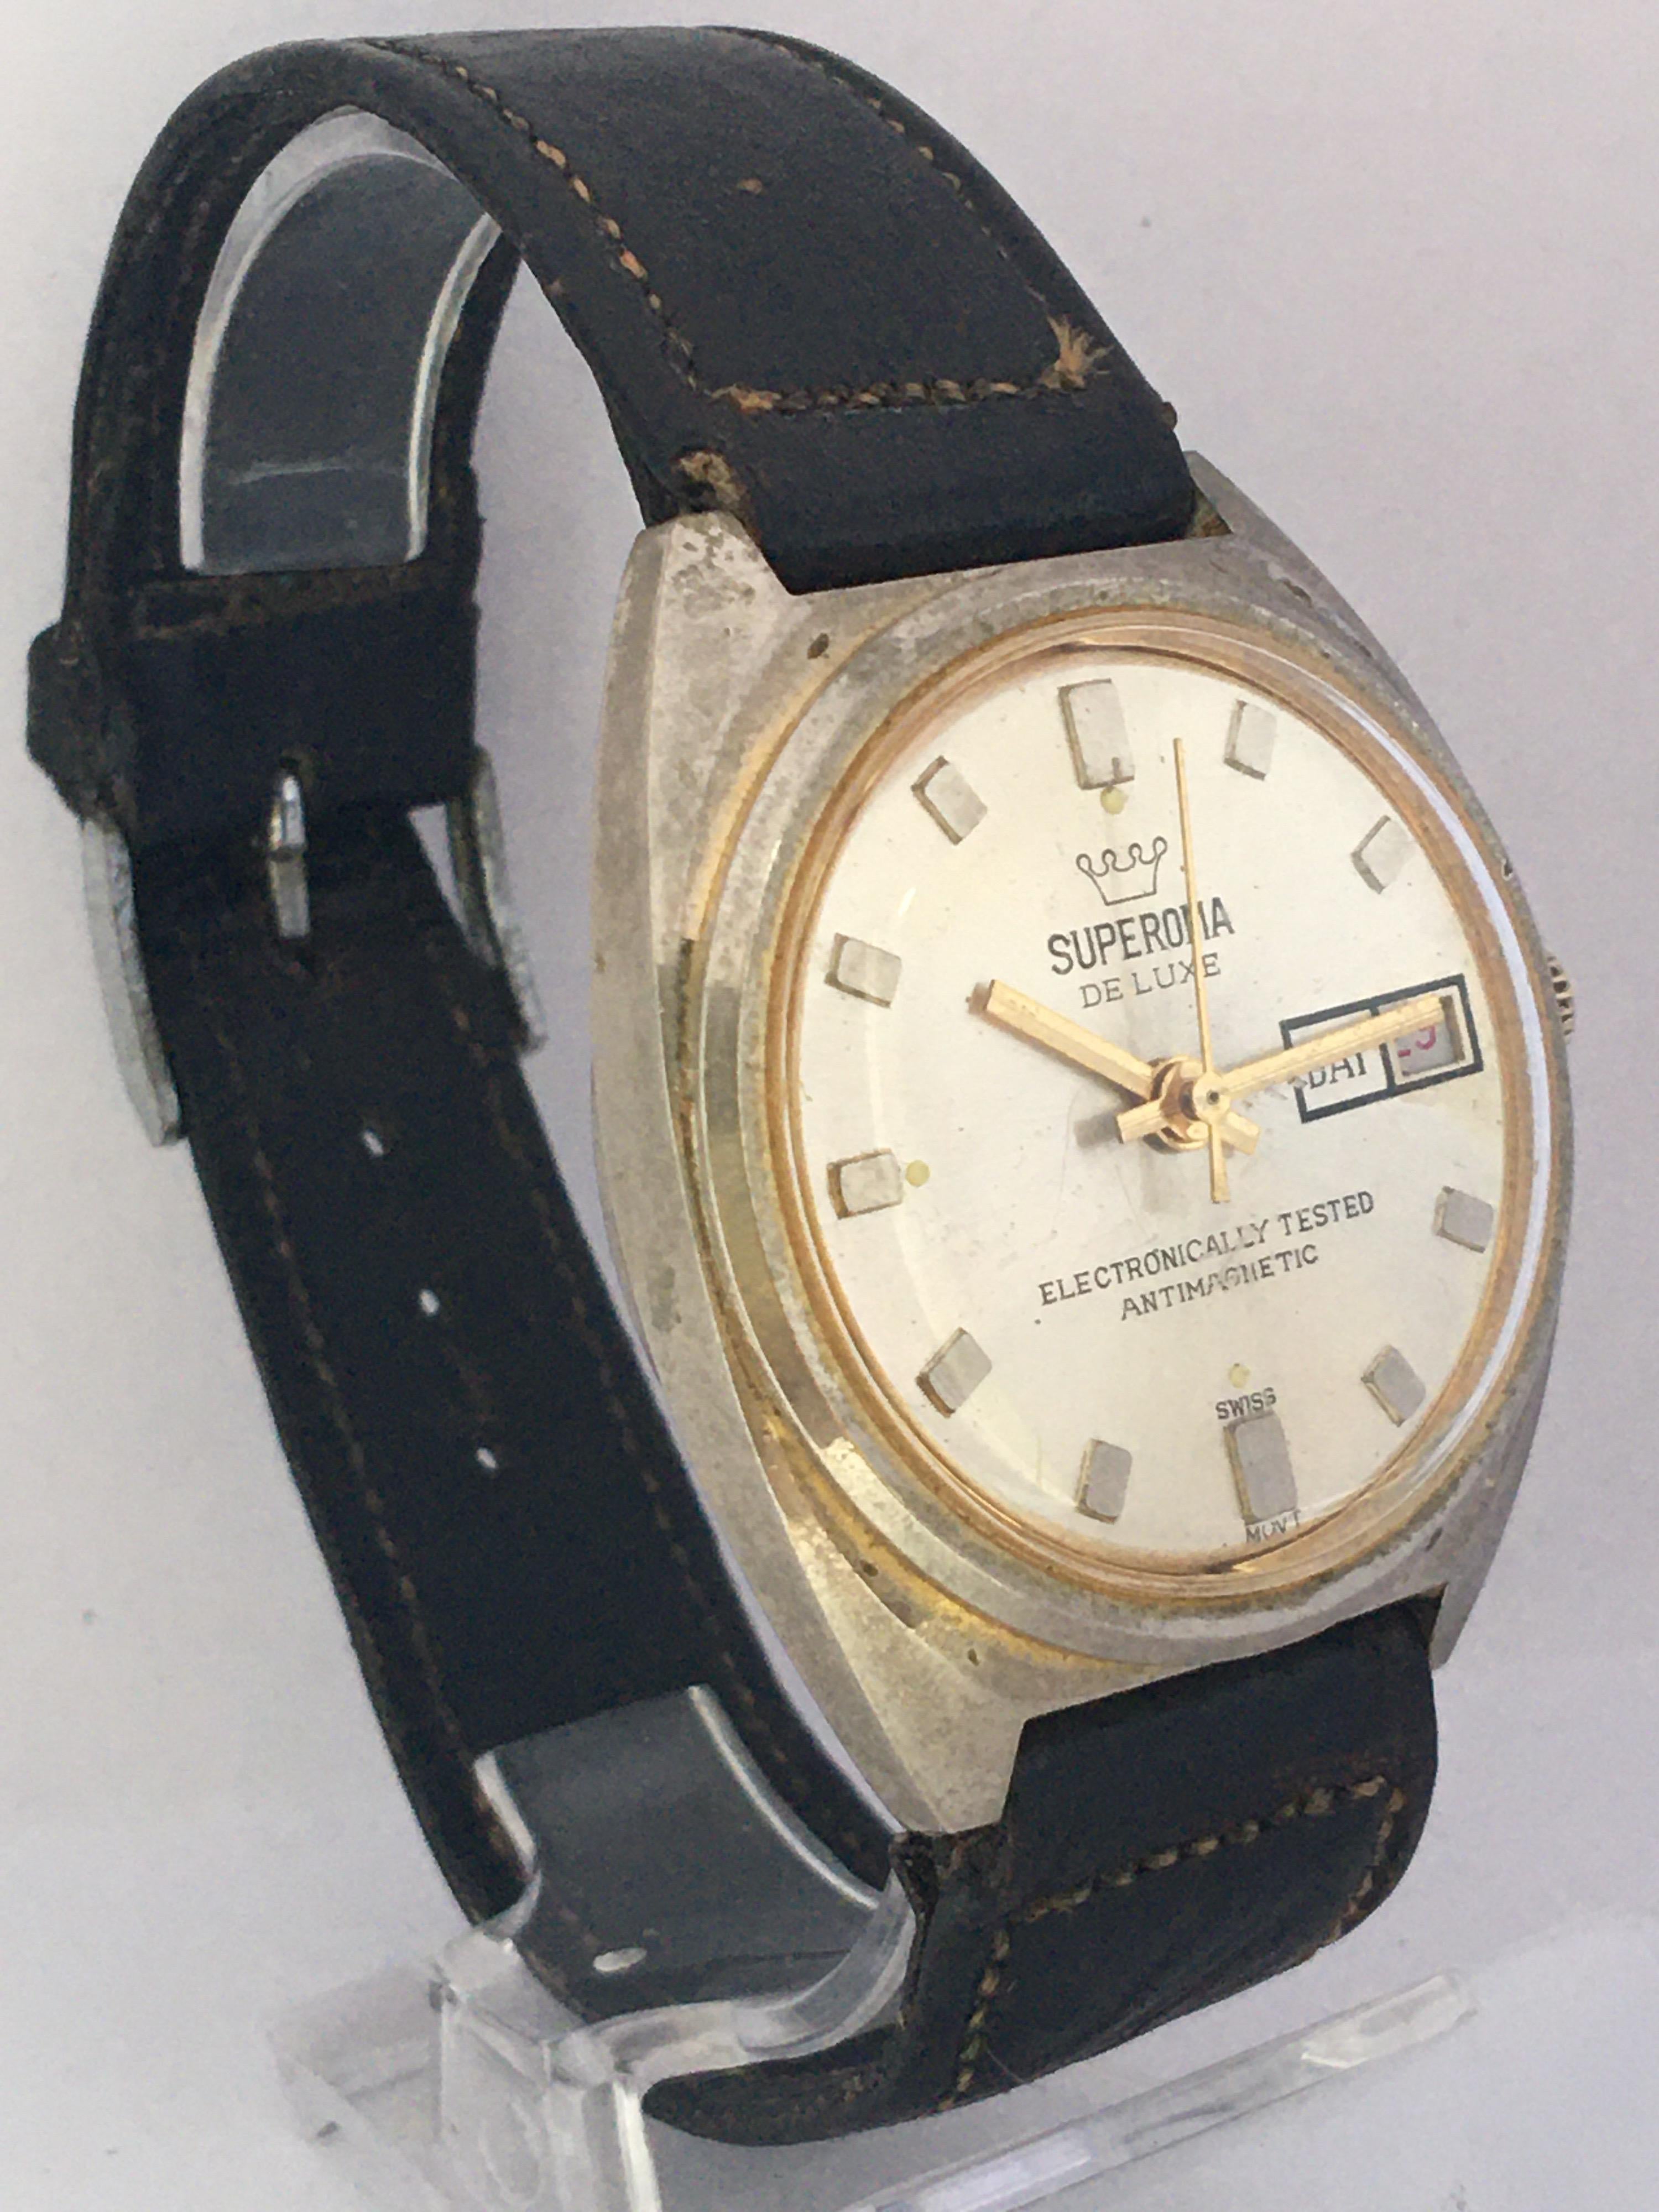 This pre-owed vintage hand winding watch is in good working condition and it is ticking well. The gold plated case is tarnished as shown. Some light and small scratches on the glass and on the watch case as shown. 

Please study the images carefully